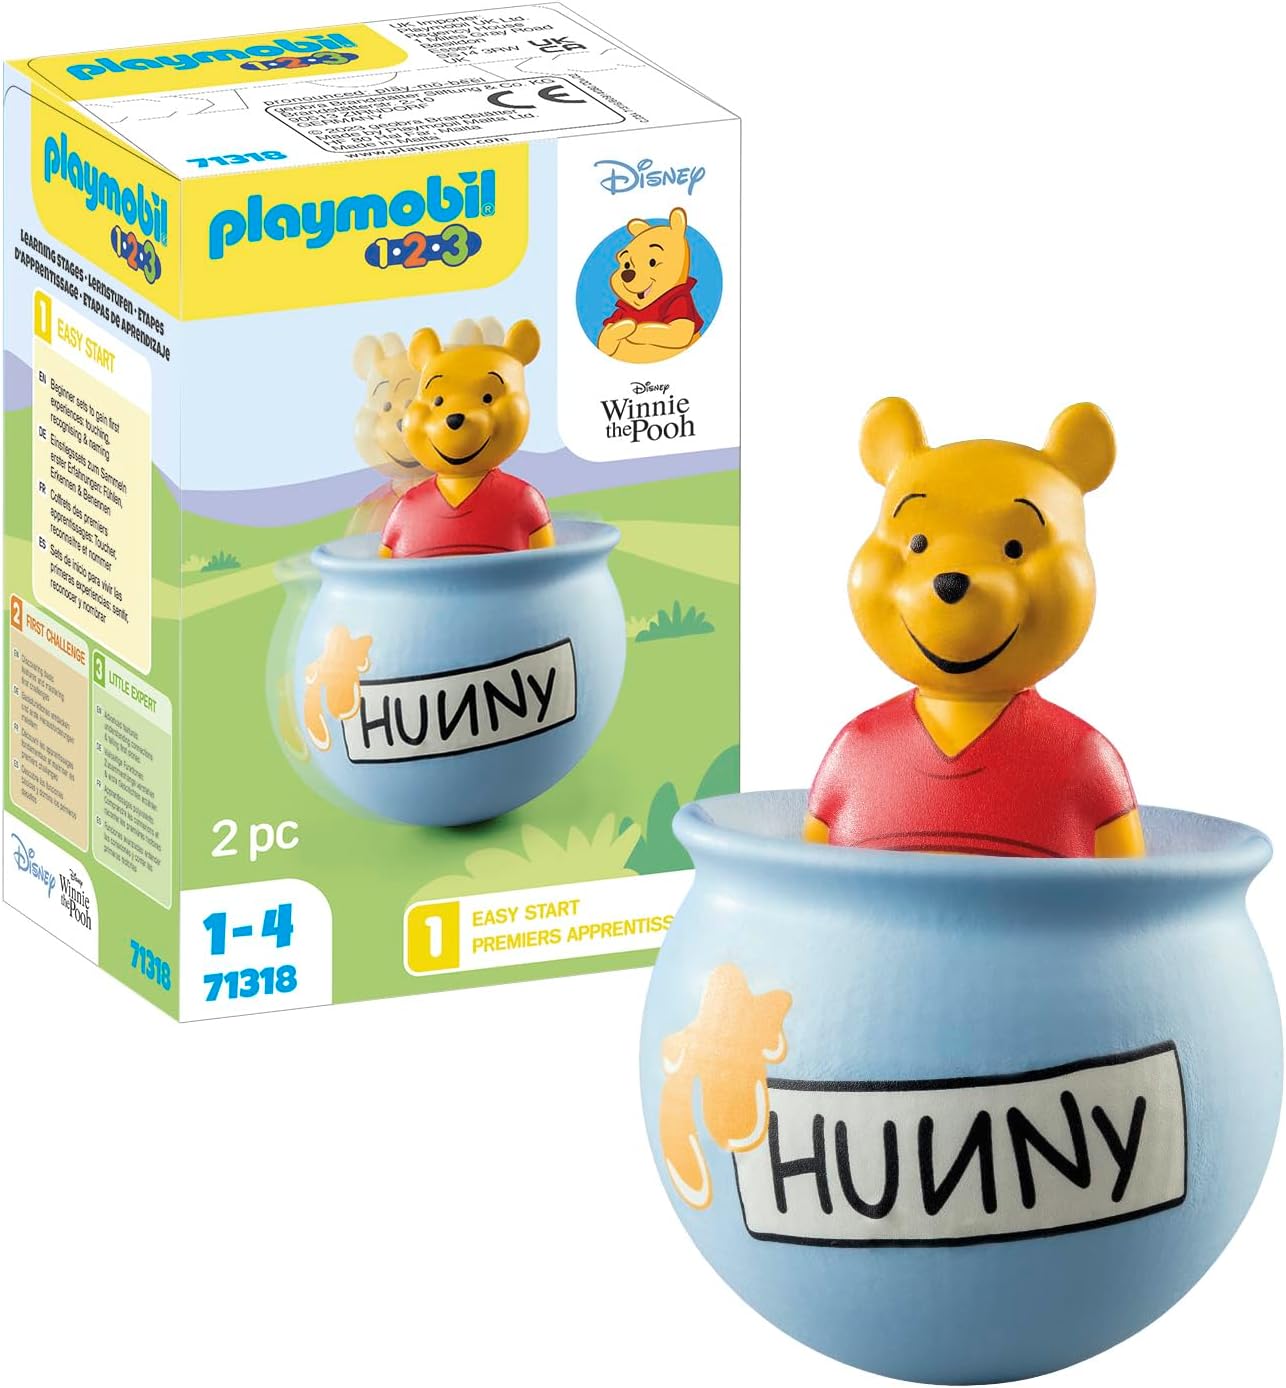 PLAYMOBIL 1.2.3 & Disney 71318 Winnies Standing Honey Pot, Winnie the Pooh, Educational Toy for Toddlers, Toy for Children from 12 Months